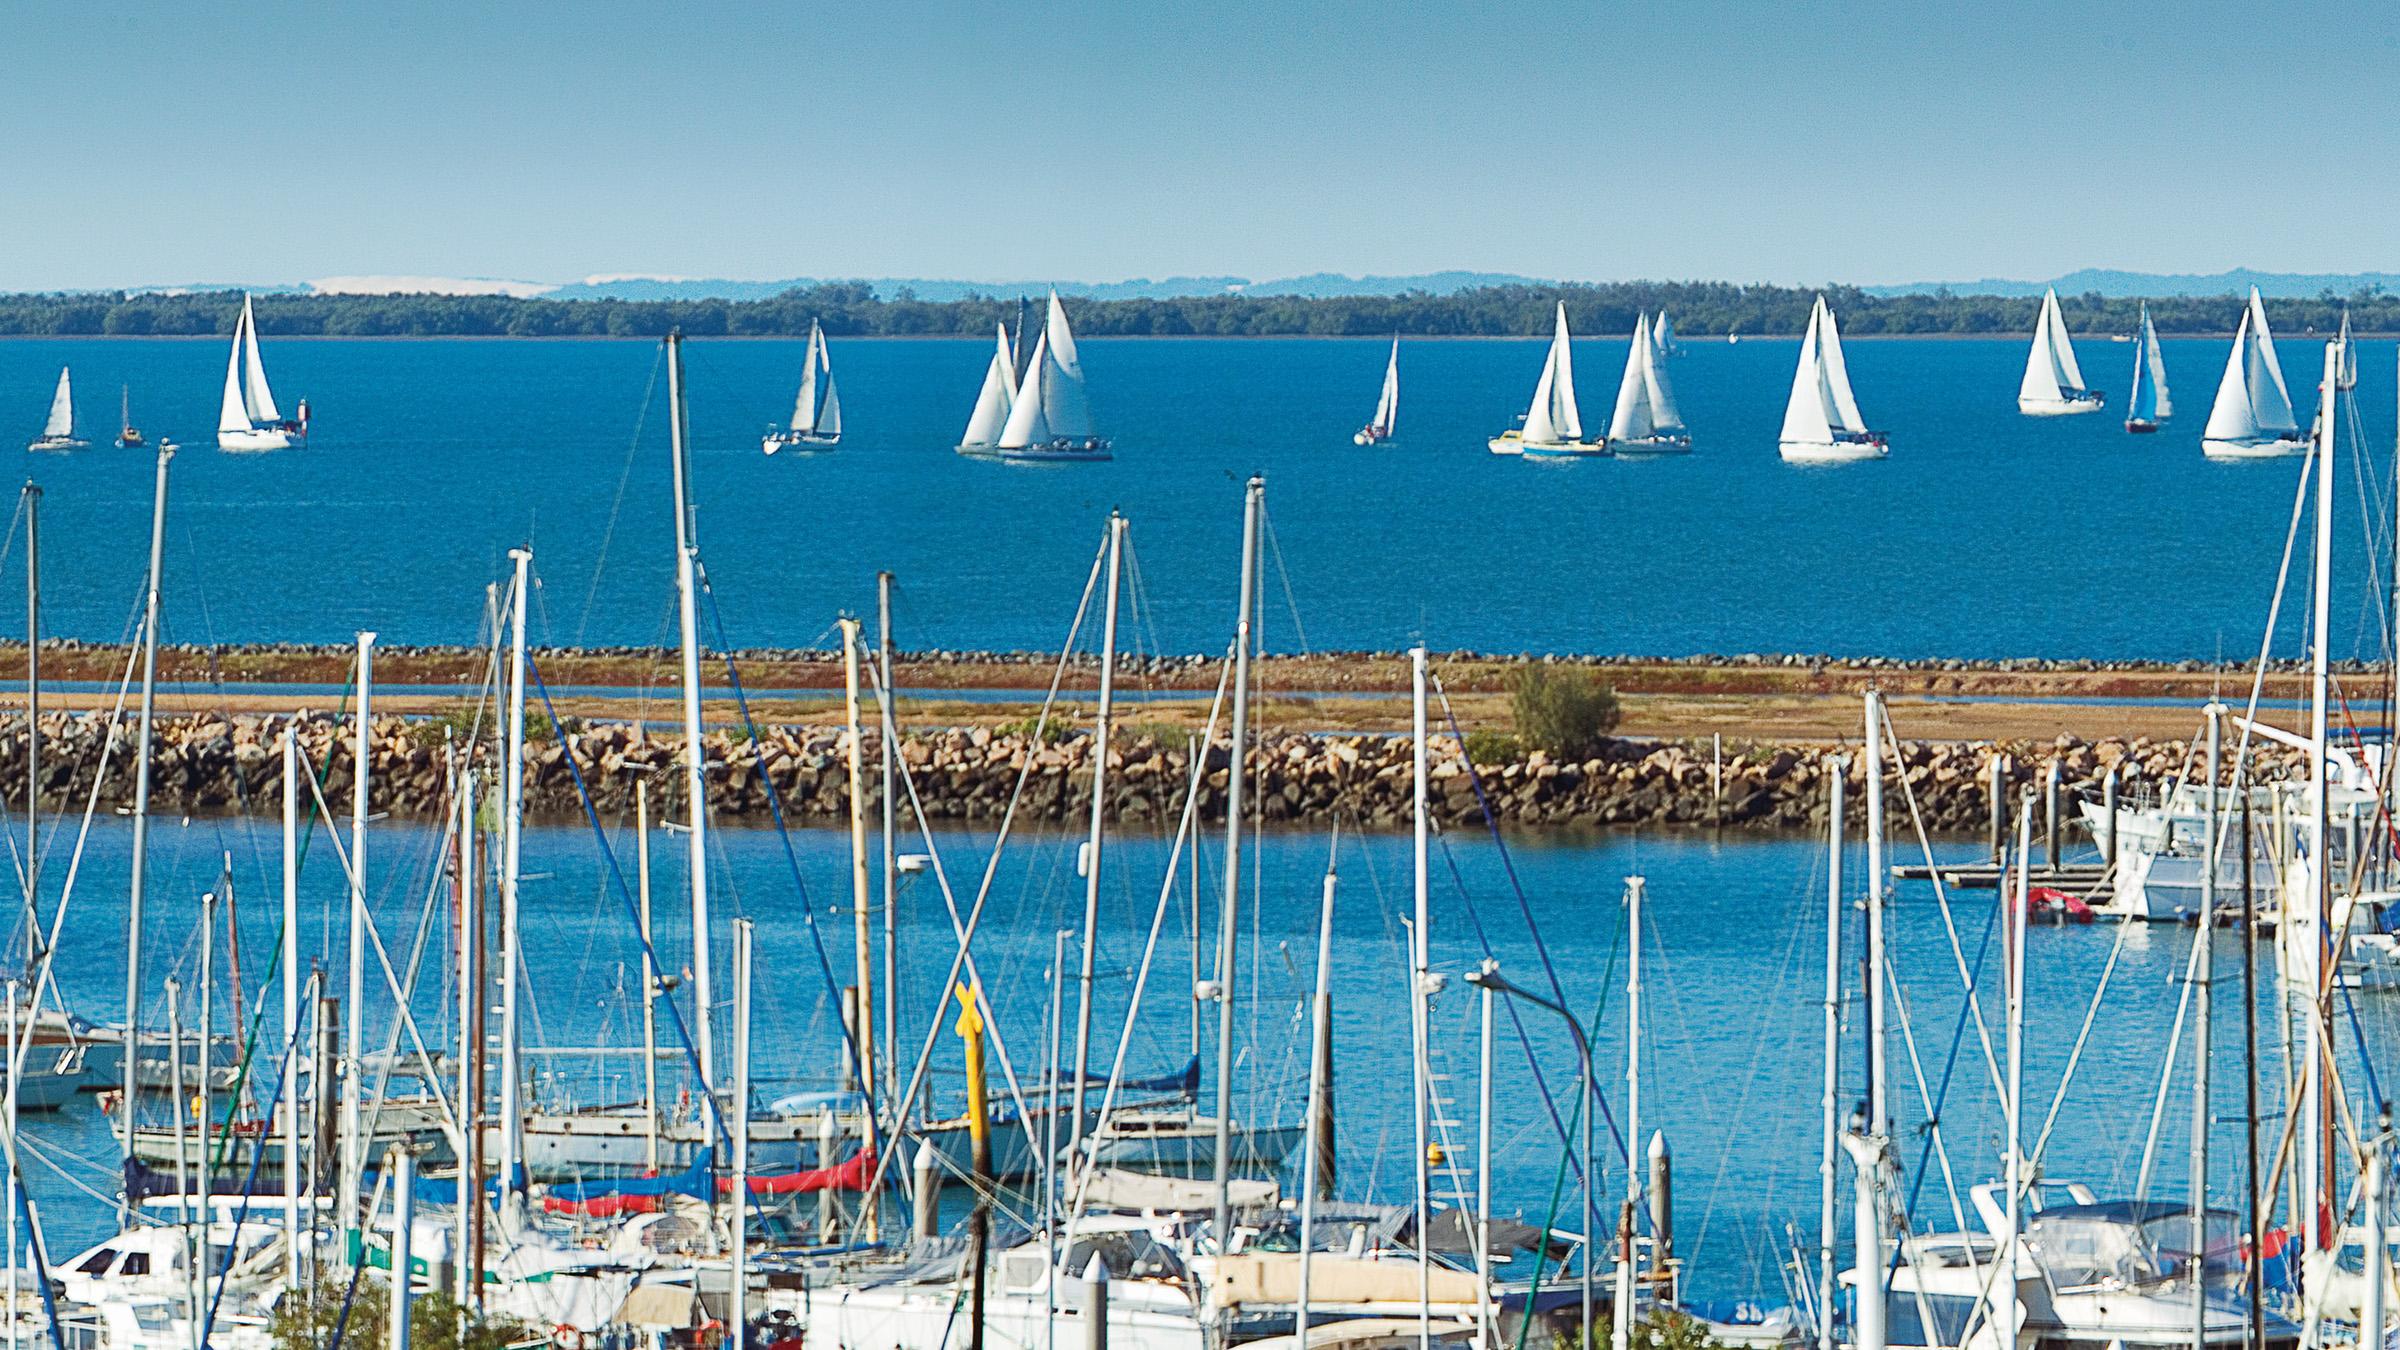 Sailboats out on the ocean and parked in a harbour on a bright blue day